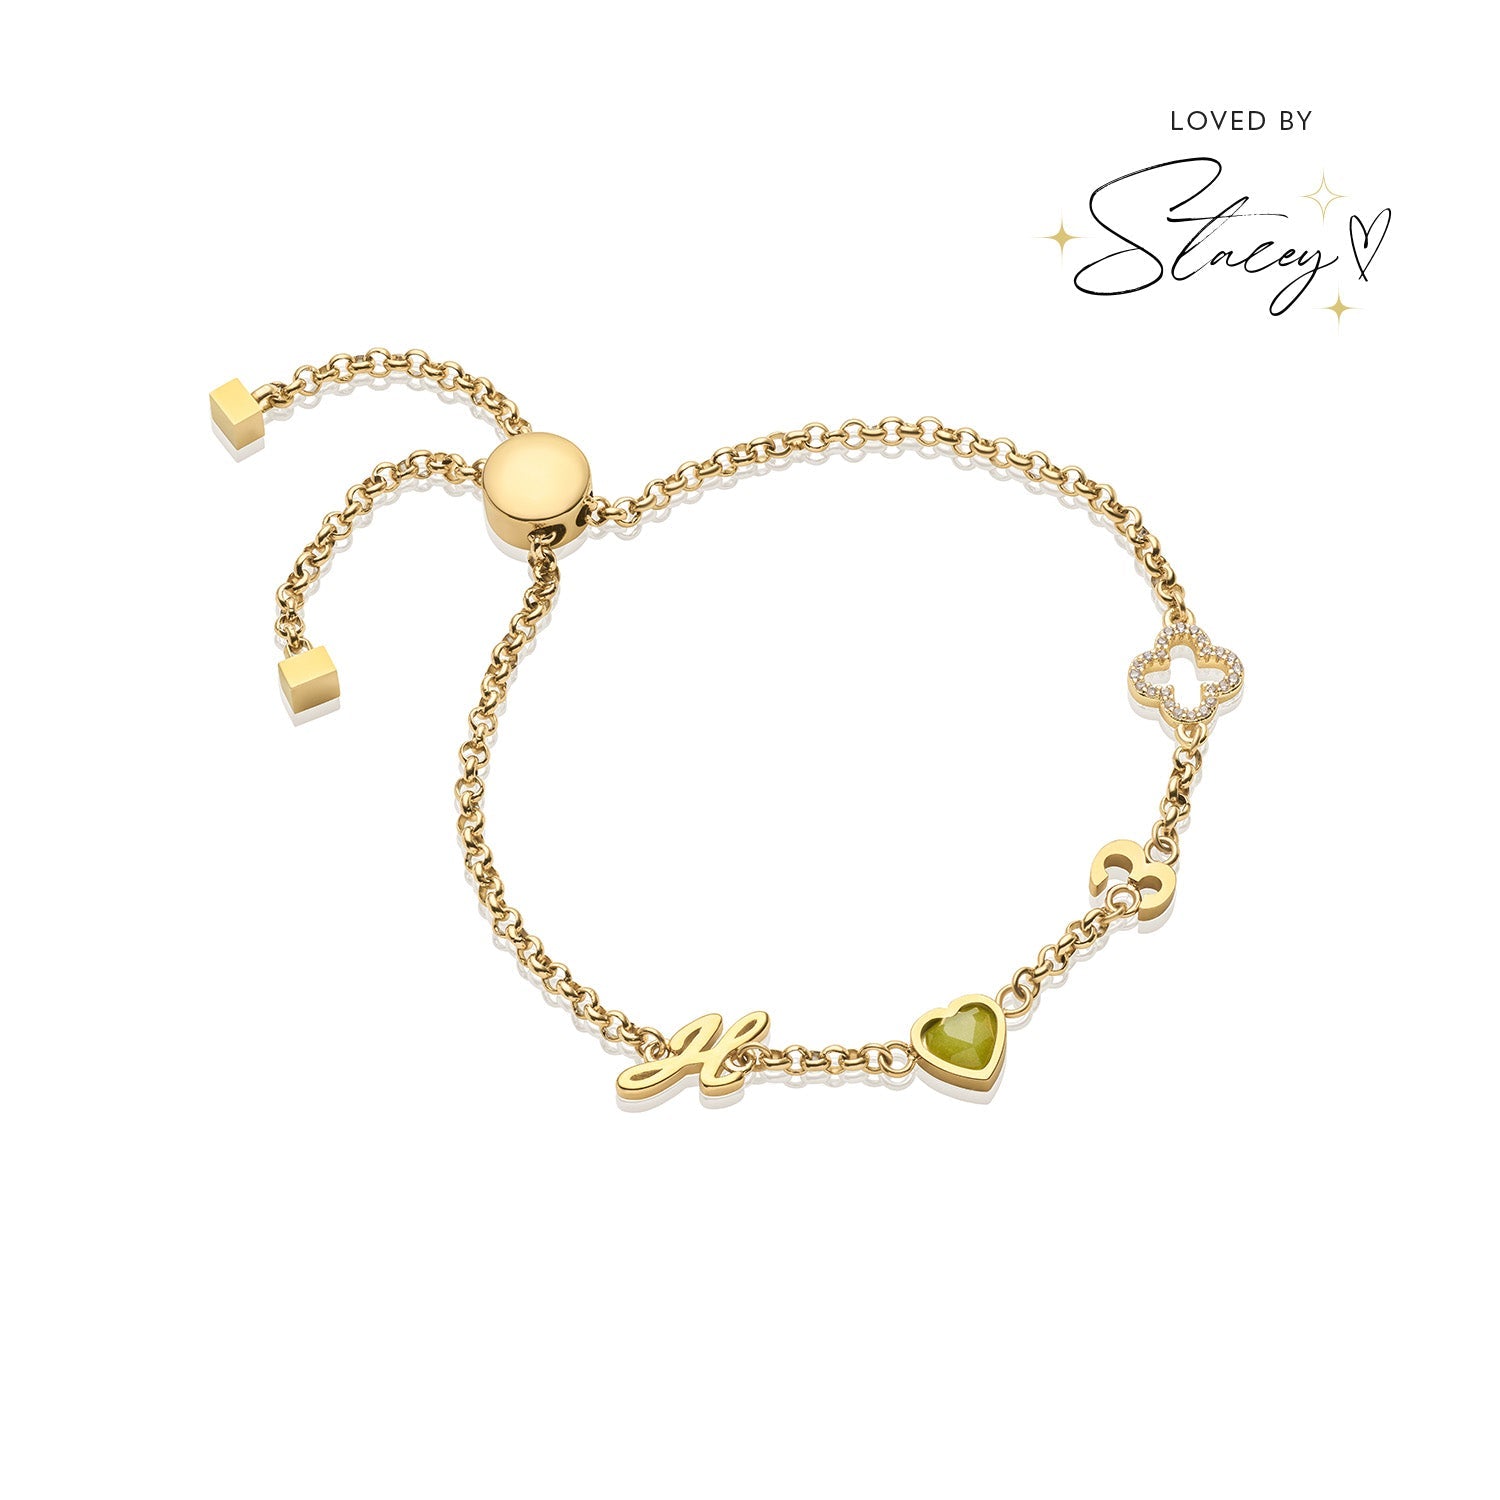 Dress up your little ones in personalized Baby gold bangles and bracelets